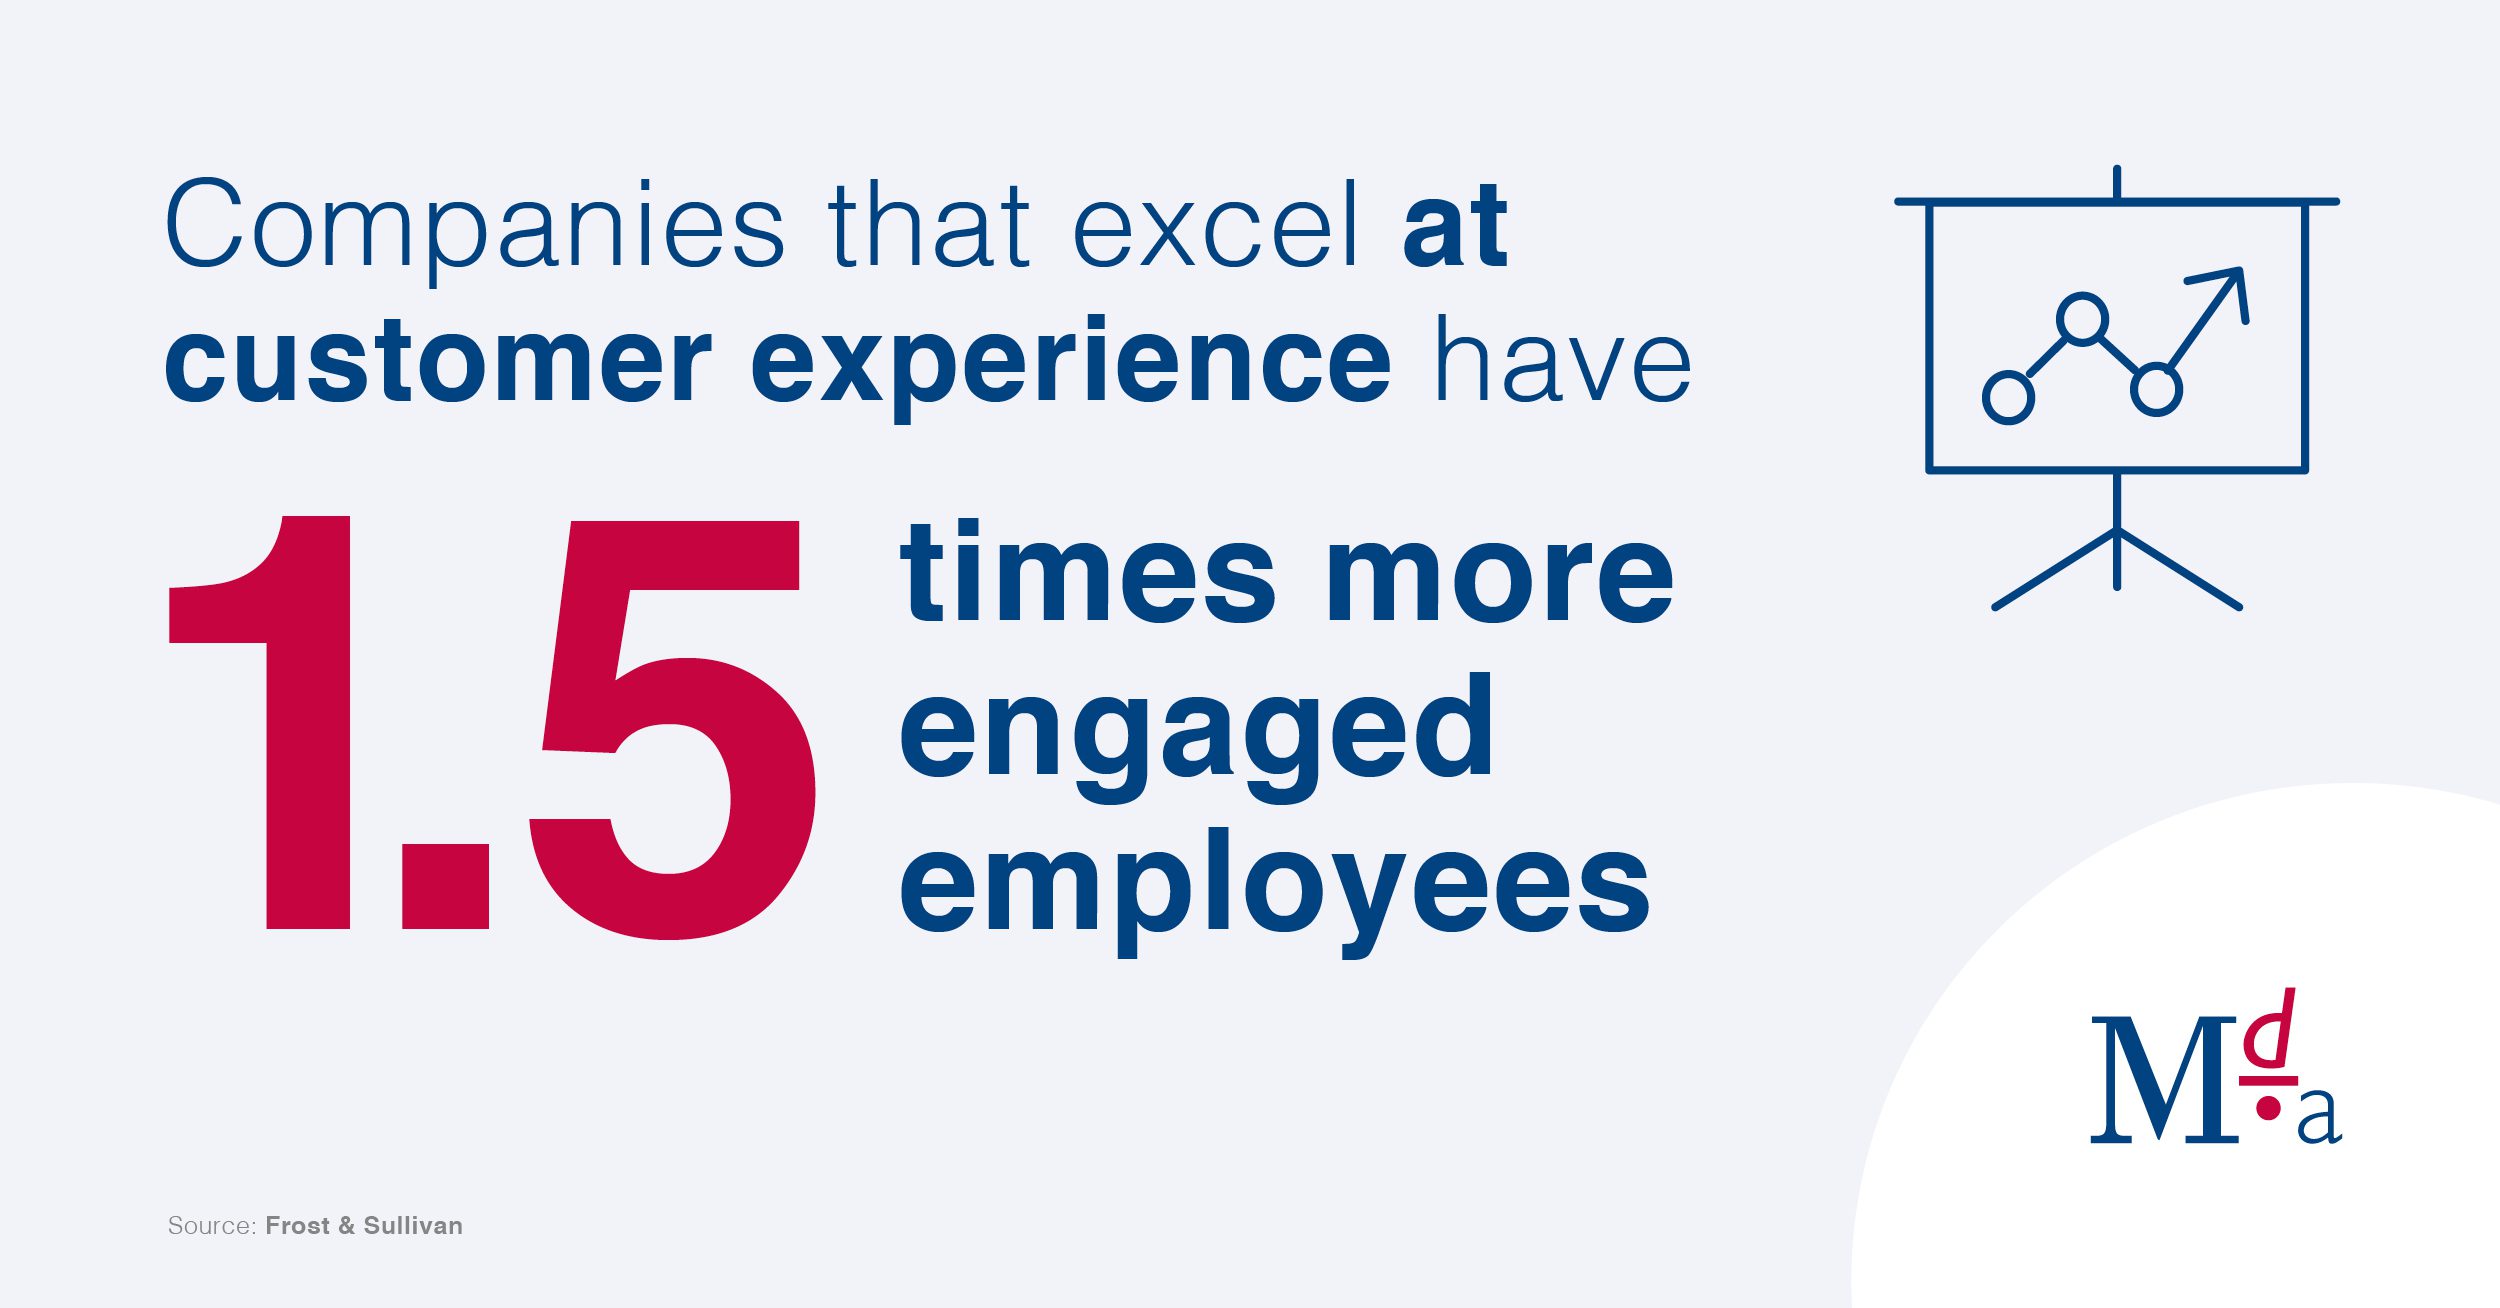 Companies that excel at customer experience have 1.5x more engaged employees